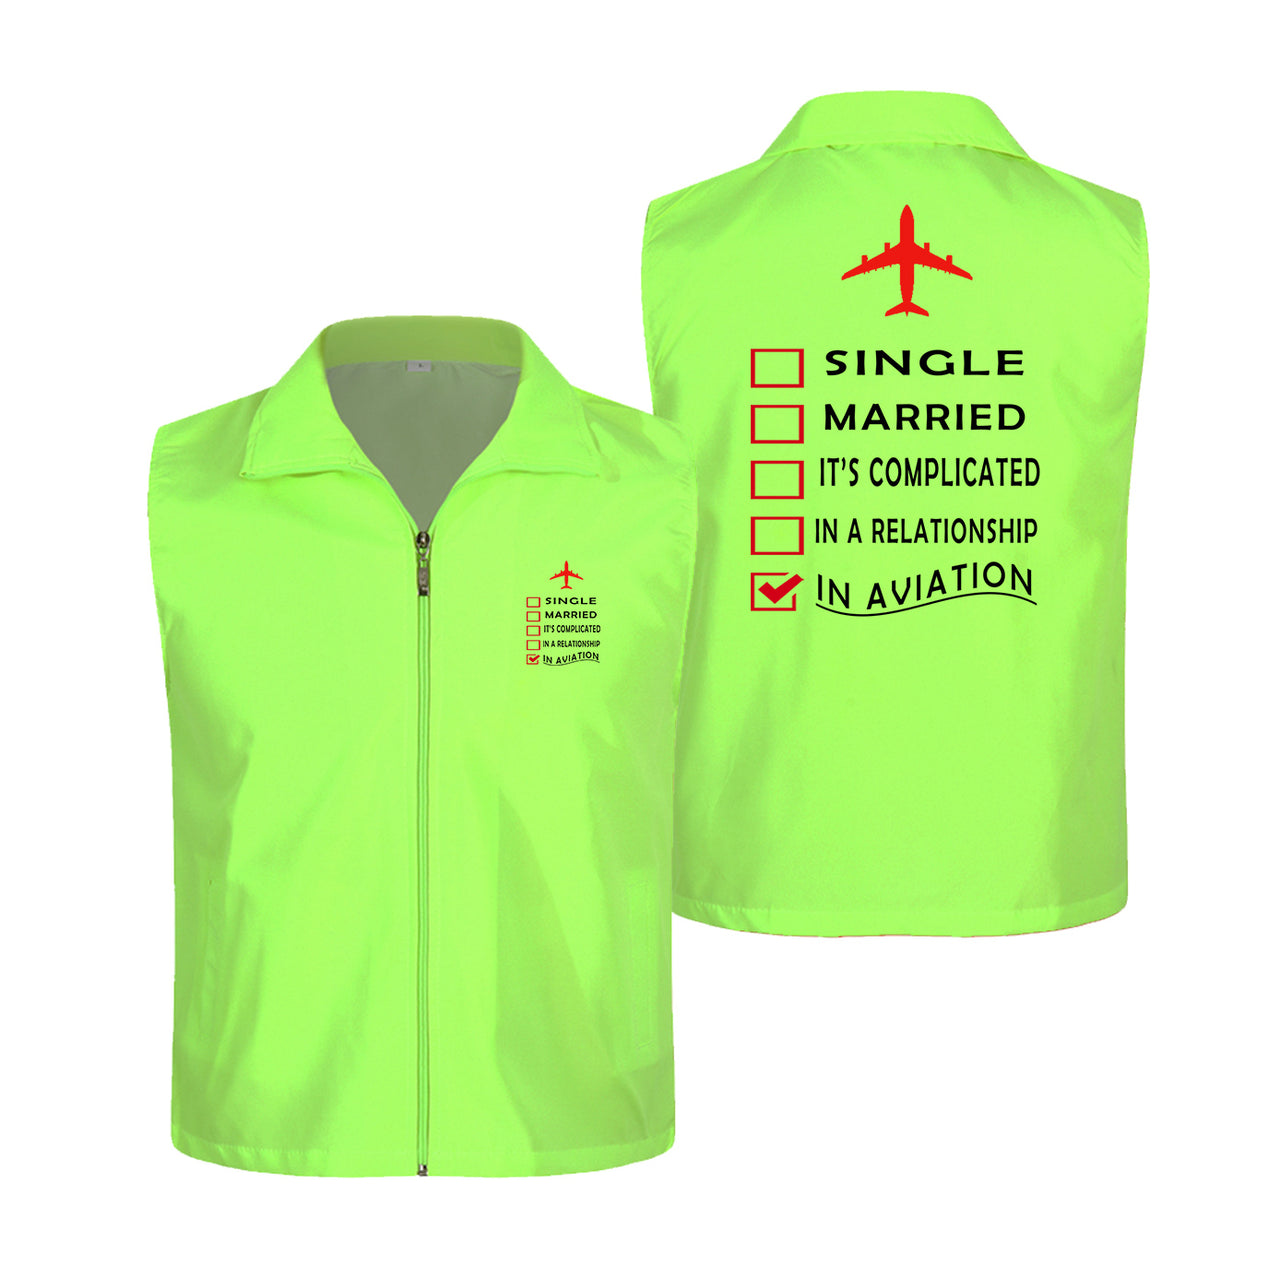 In Aviation Designed Thin Style Vests